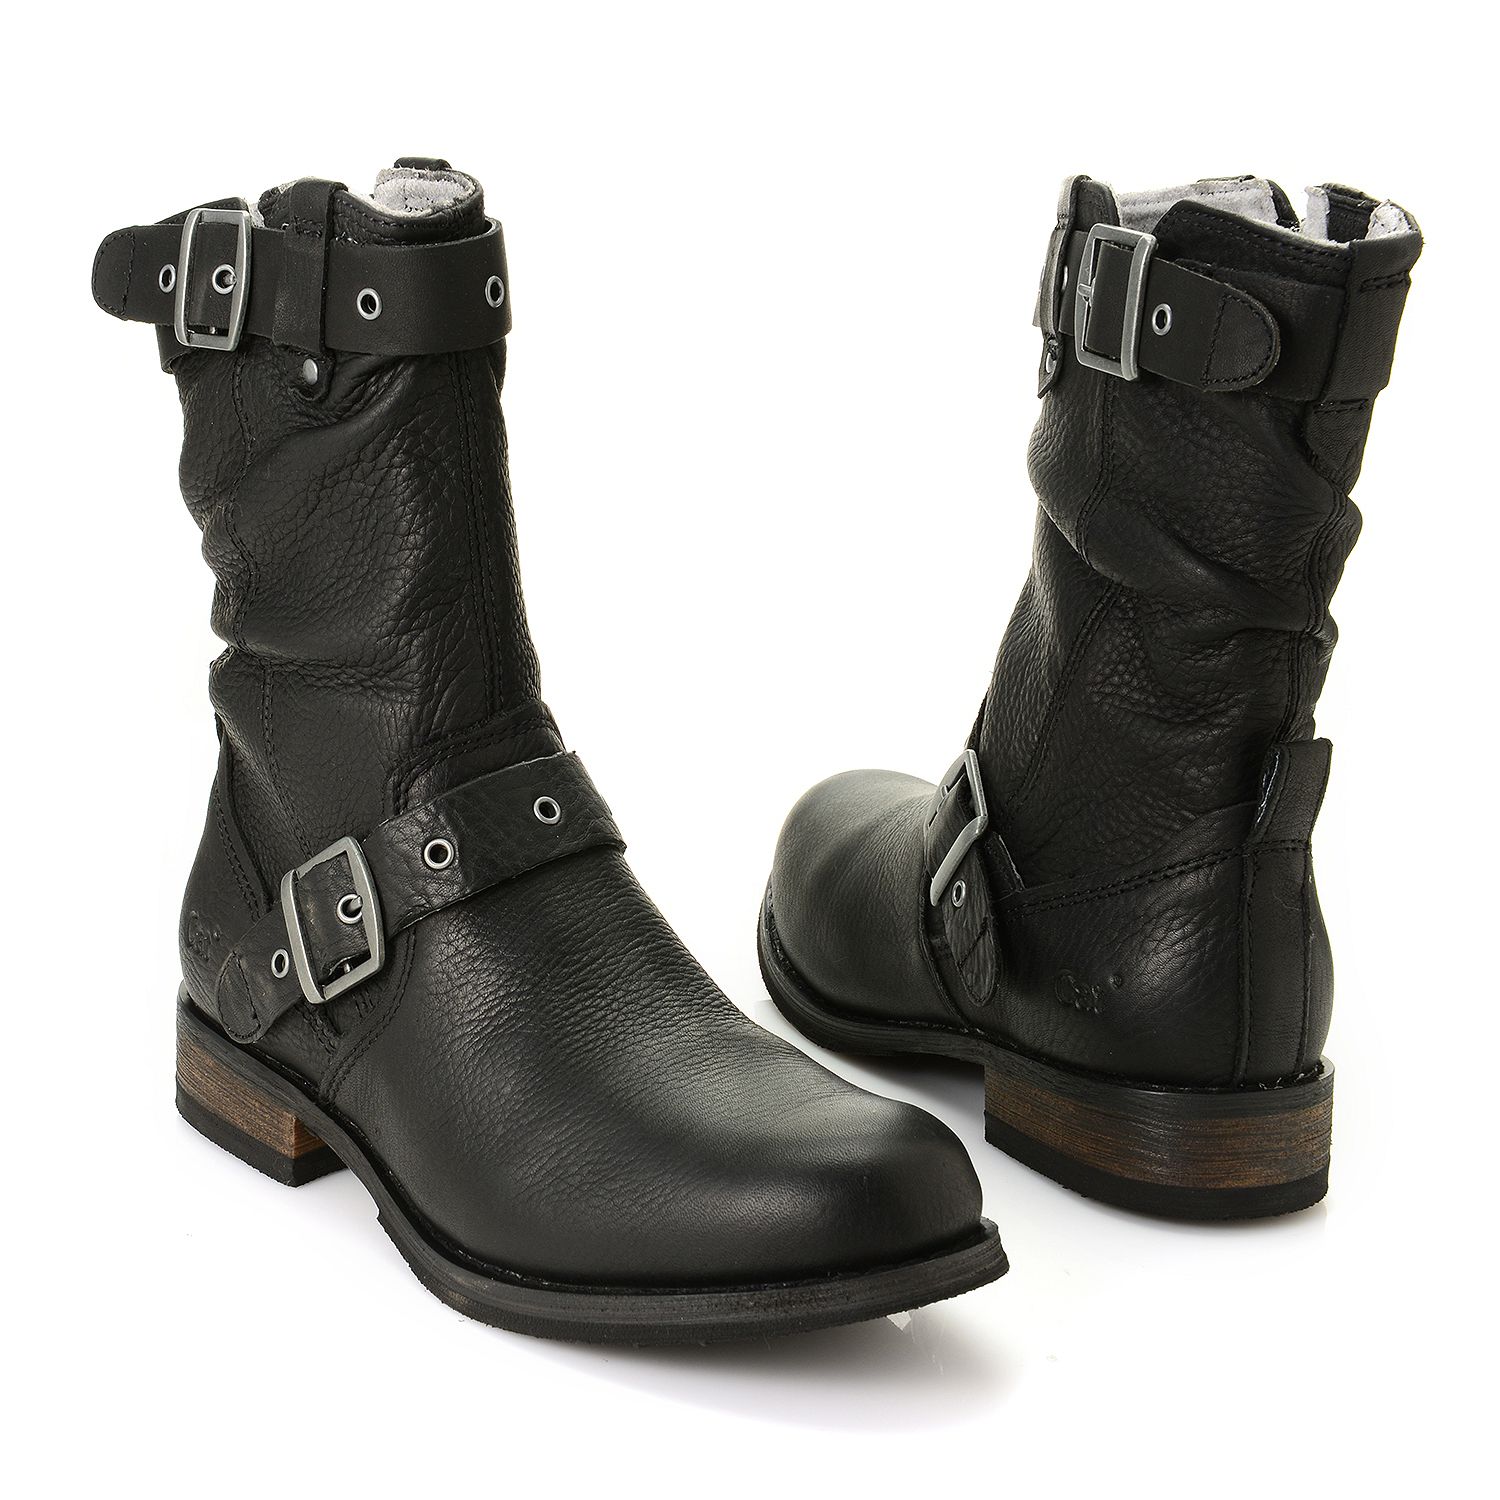 721-275- CAT Footwear "Midi" Leather Double Buckle Detailed Mid-Calf Boots